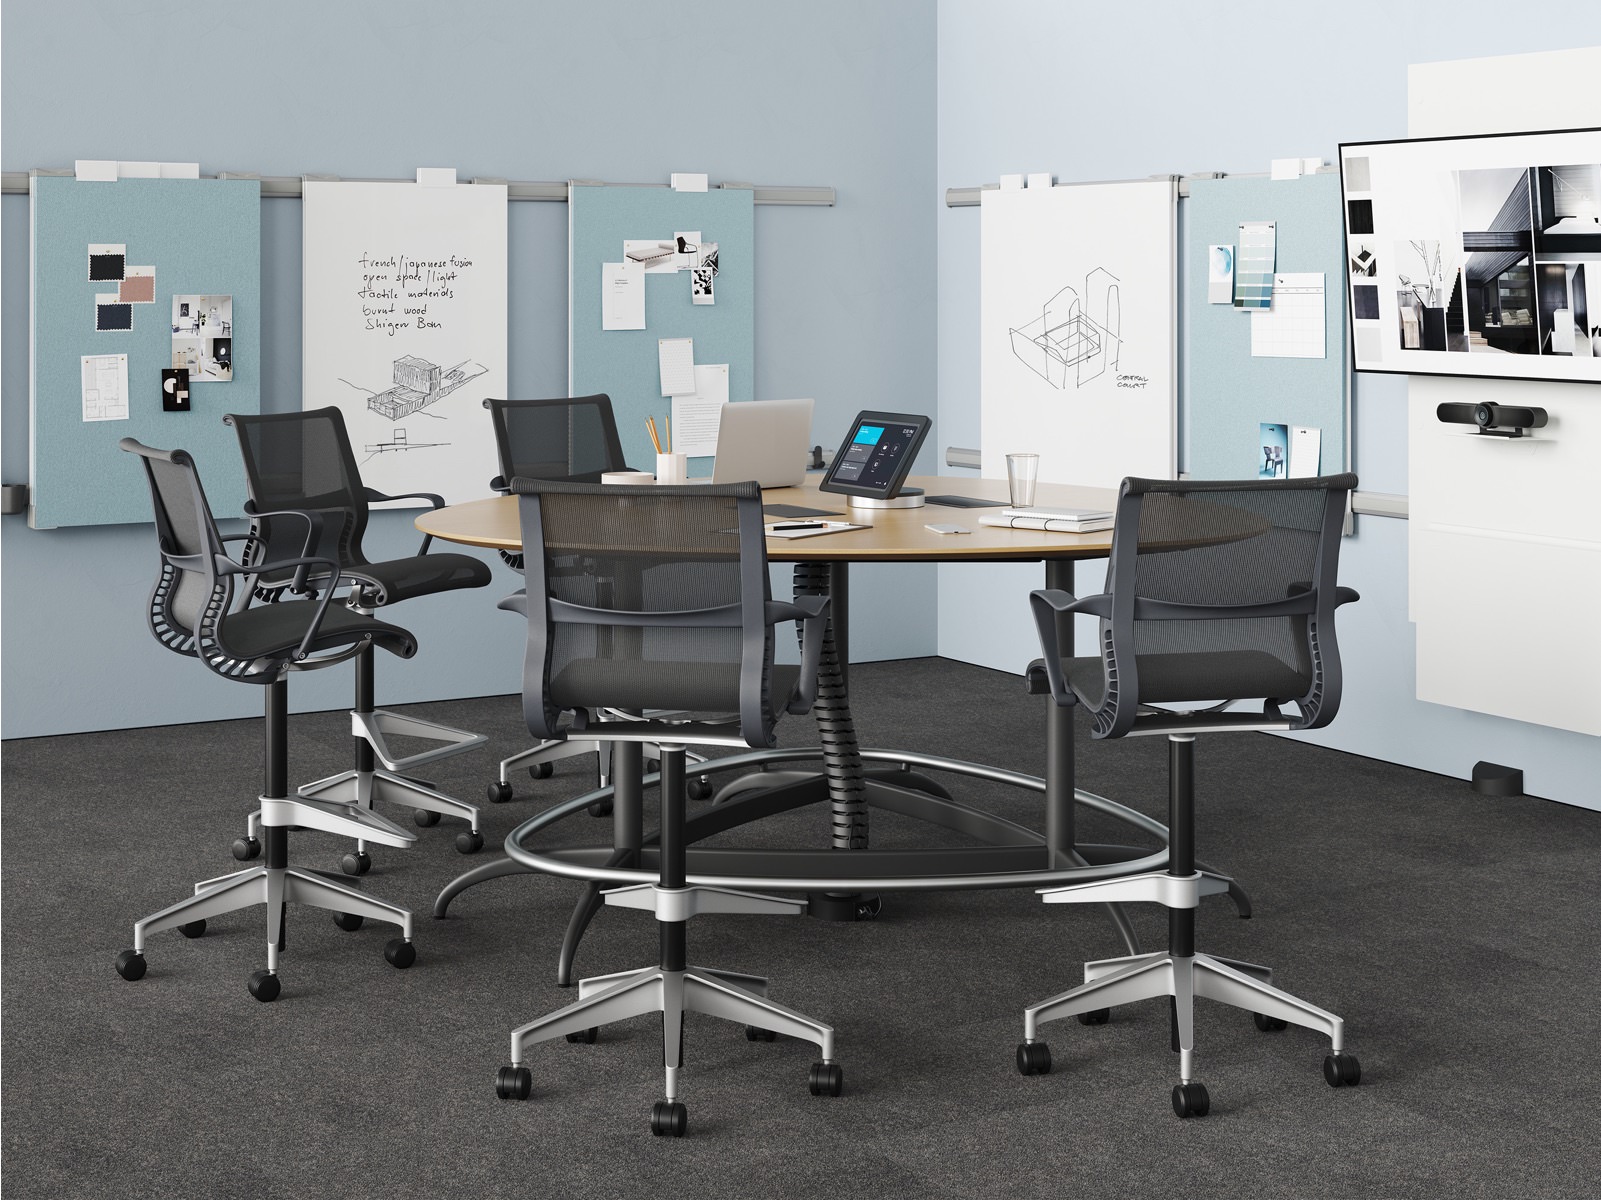 A meeting room setting featuring an Exclave table with five black Setu Stools in front of a monitor and Exclave display elements.